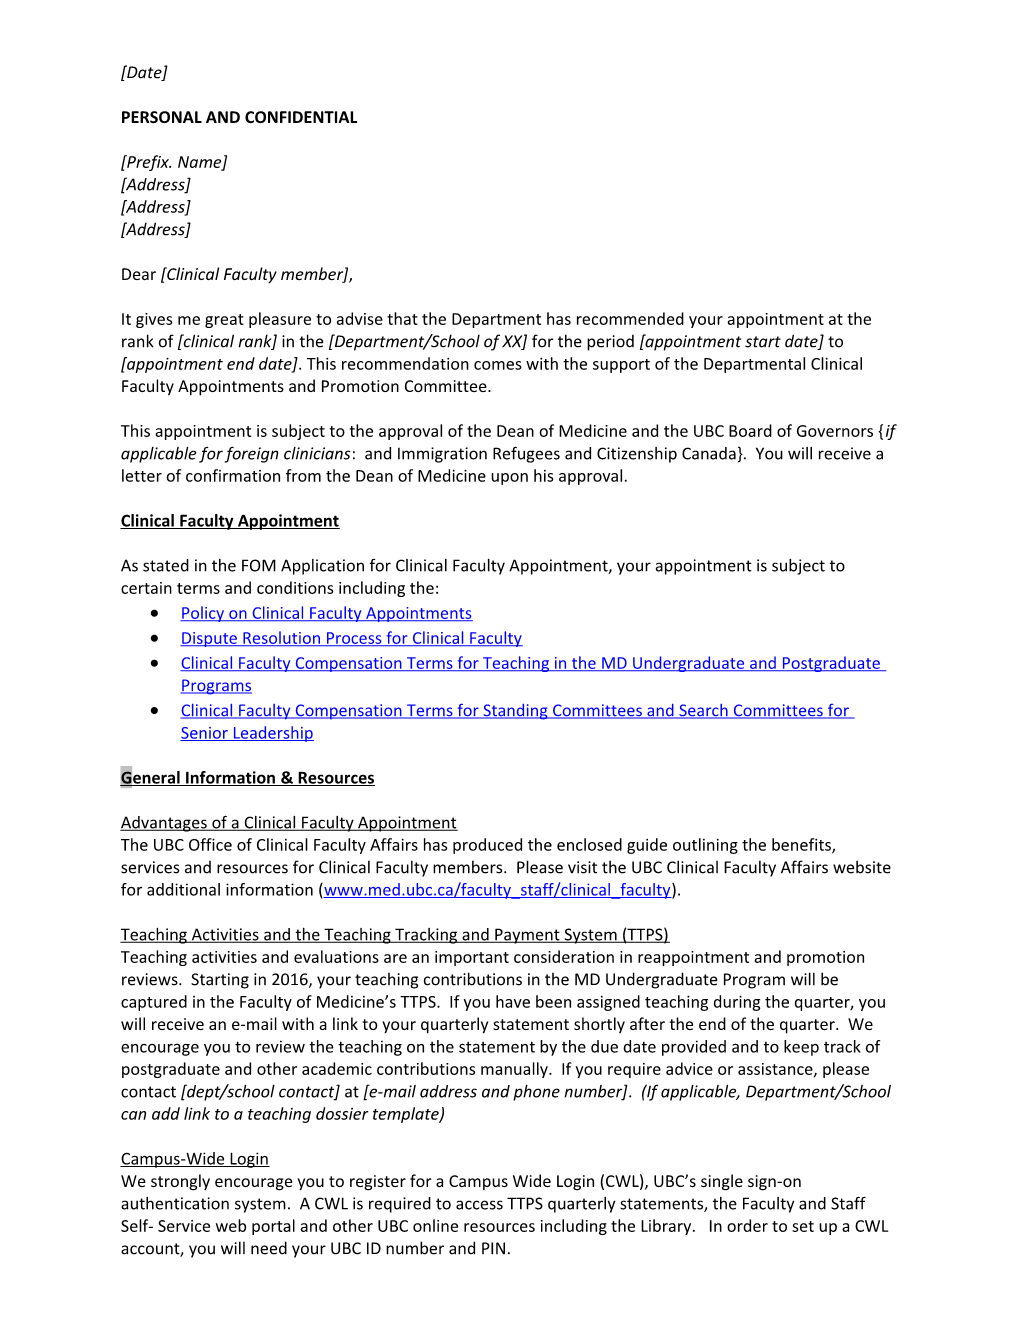 Draft Template Letter for Administrators to Send to New Clinical Faculty Members